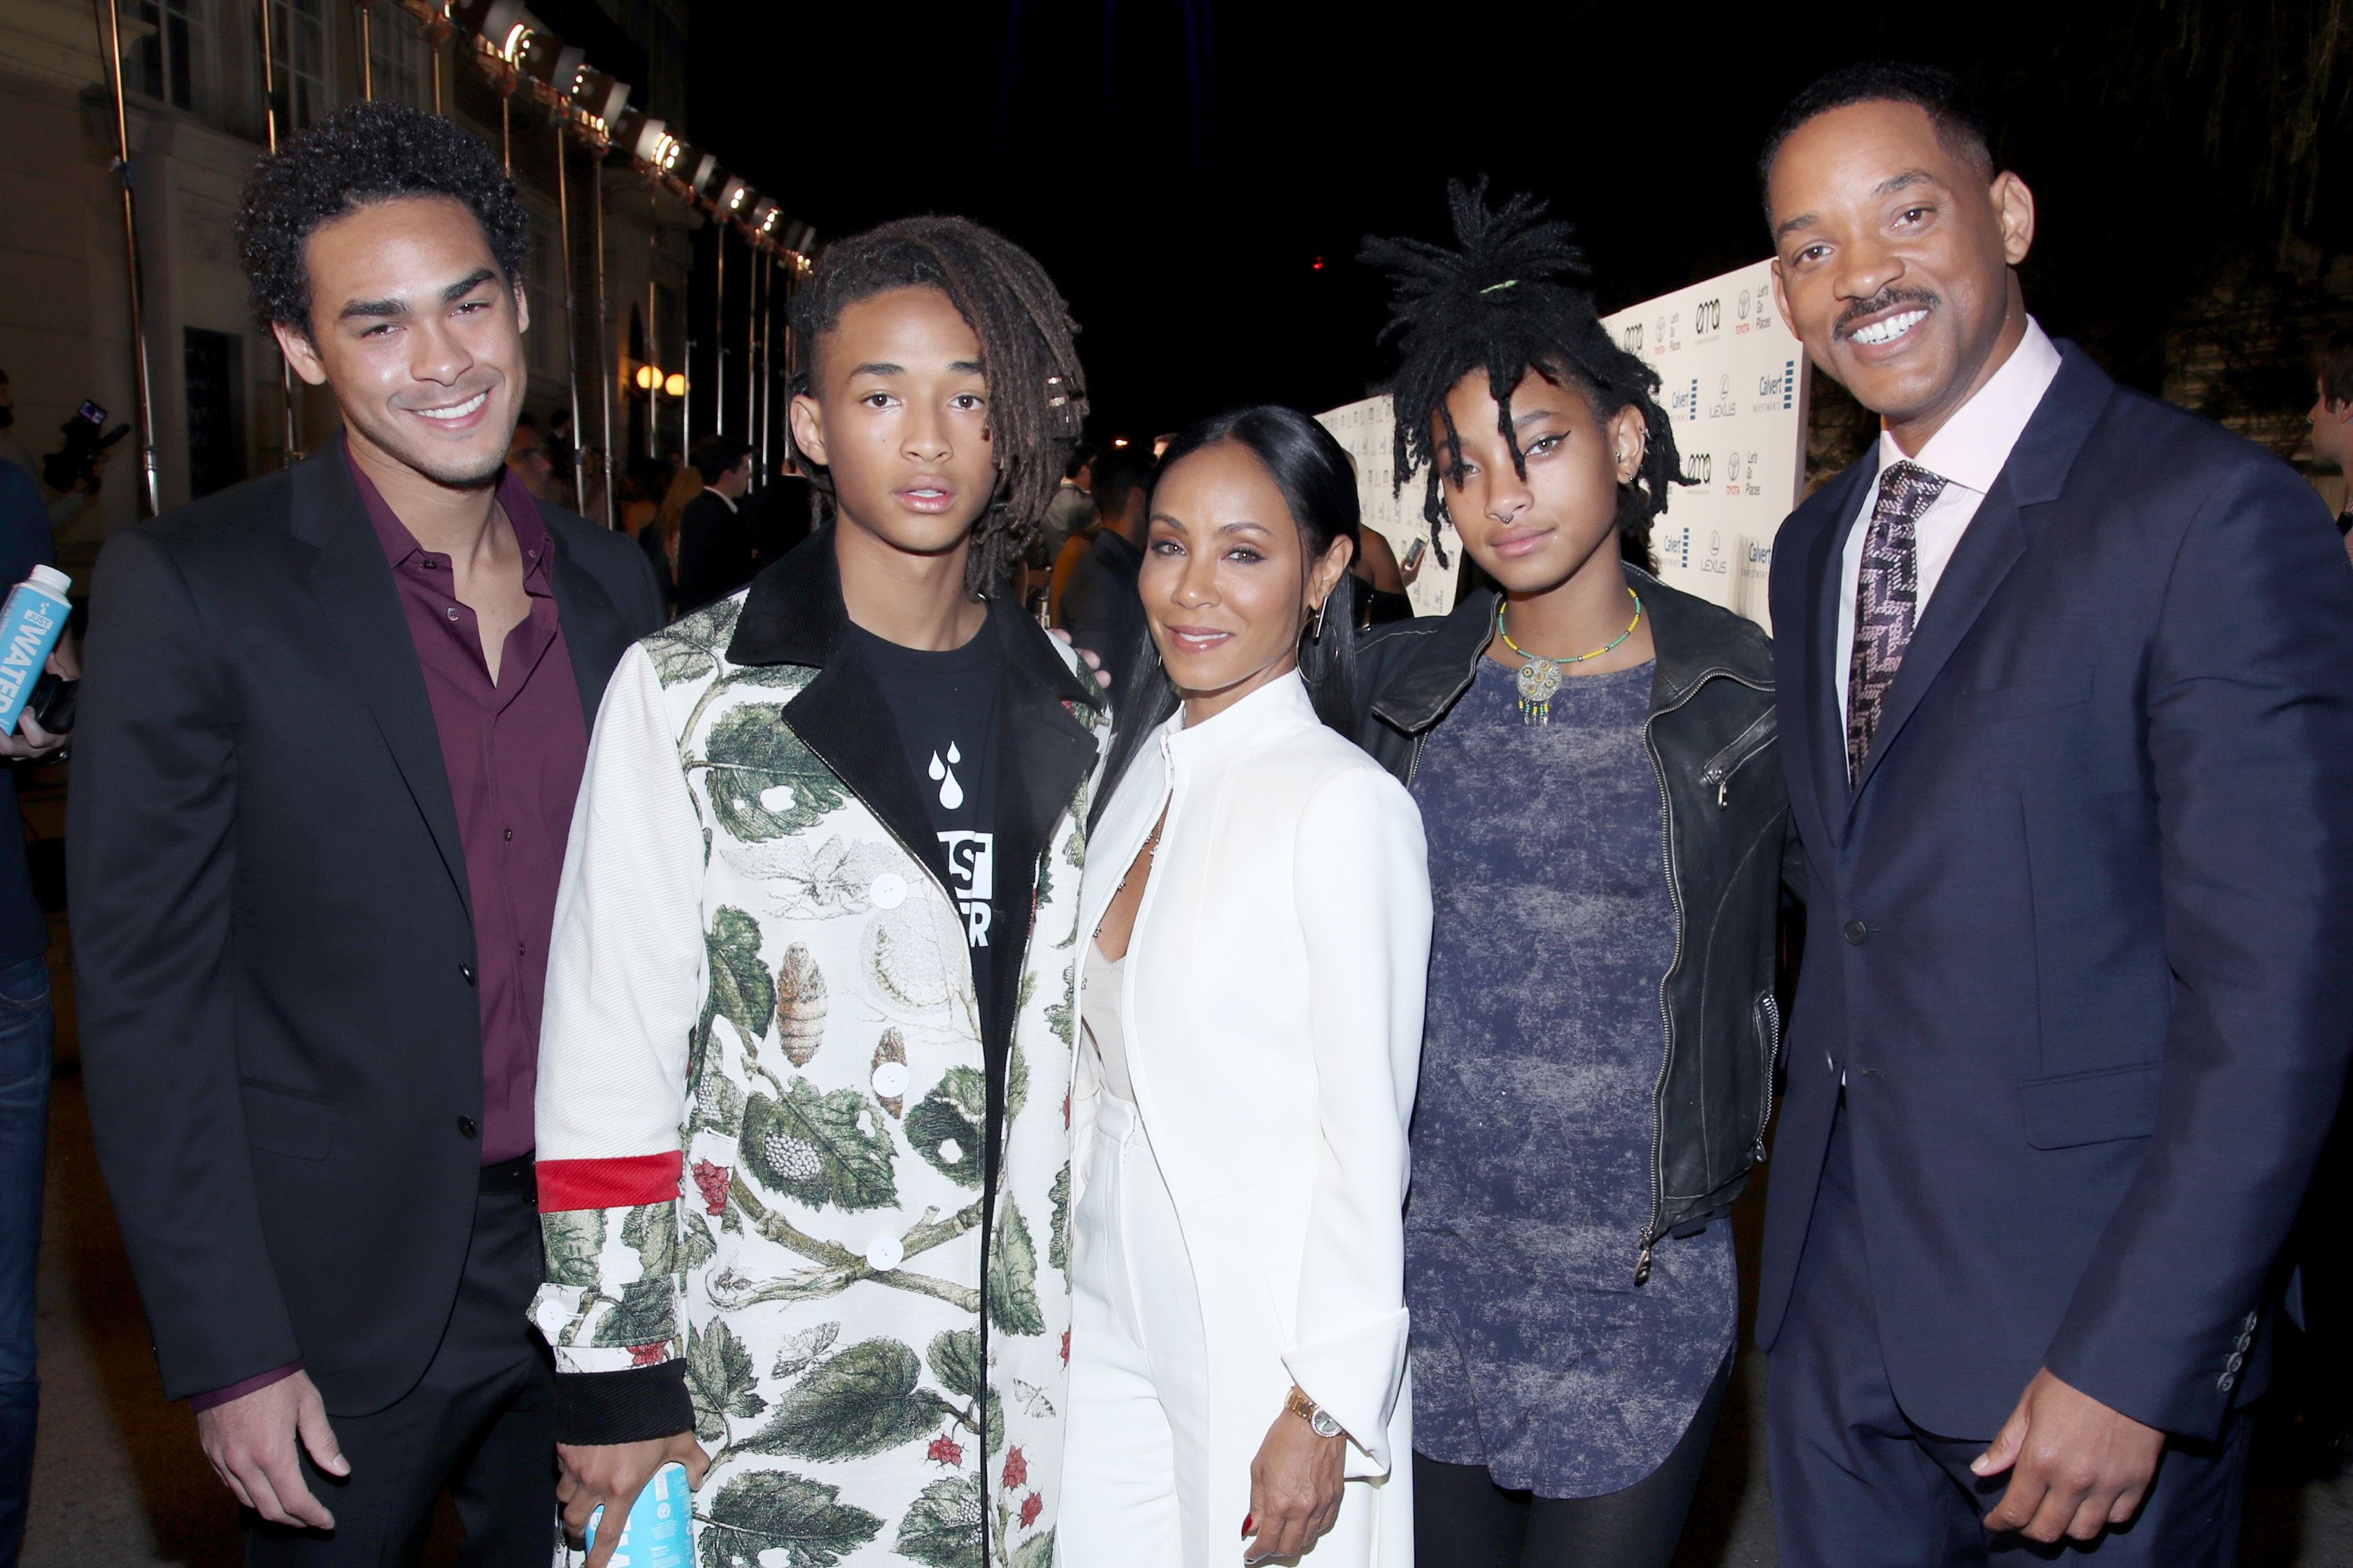 Trey Smith, Jaden Smith, Jada Pinkett-Smith, Willow Smith and Will Smith attend the Environmental Media Association 26th Annual EMA Awards Presented By Toyota, Lexus And Calvert at Warner Bros. Studios on October 22, 2016 in Burbank, California. | Source: Getty Images